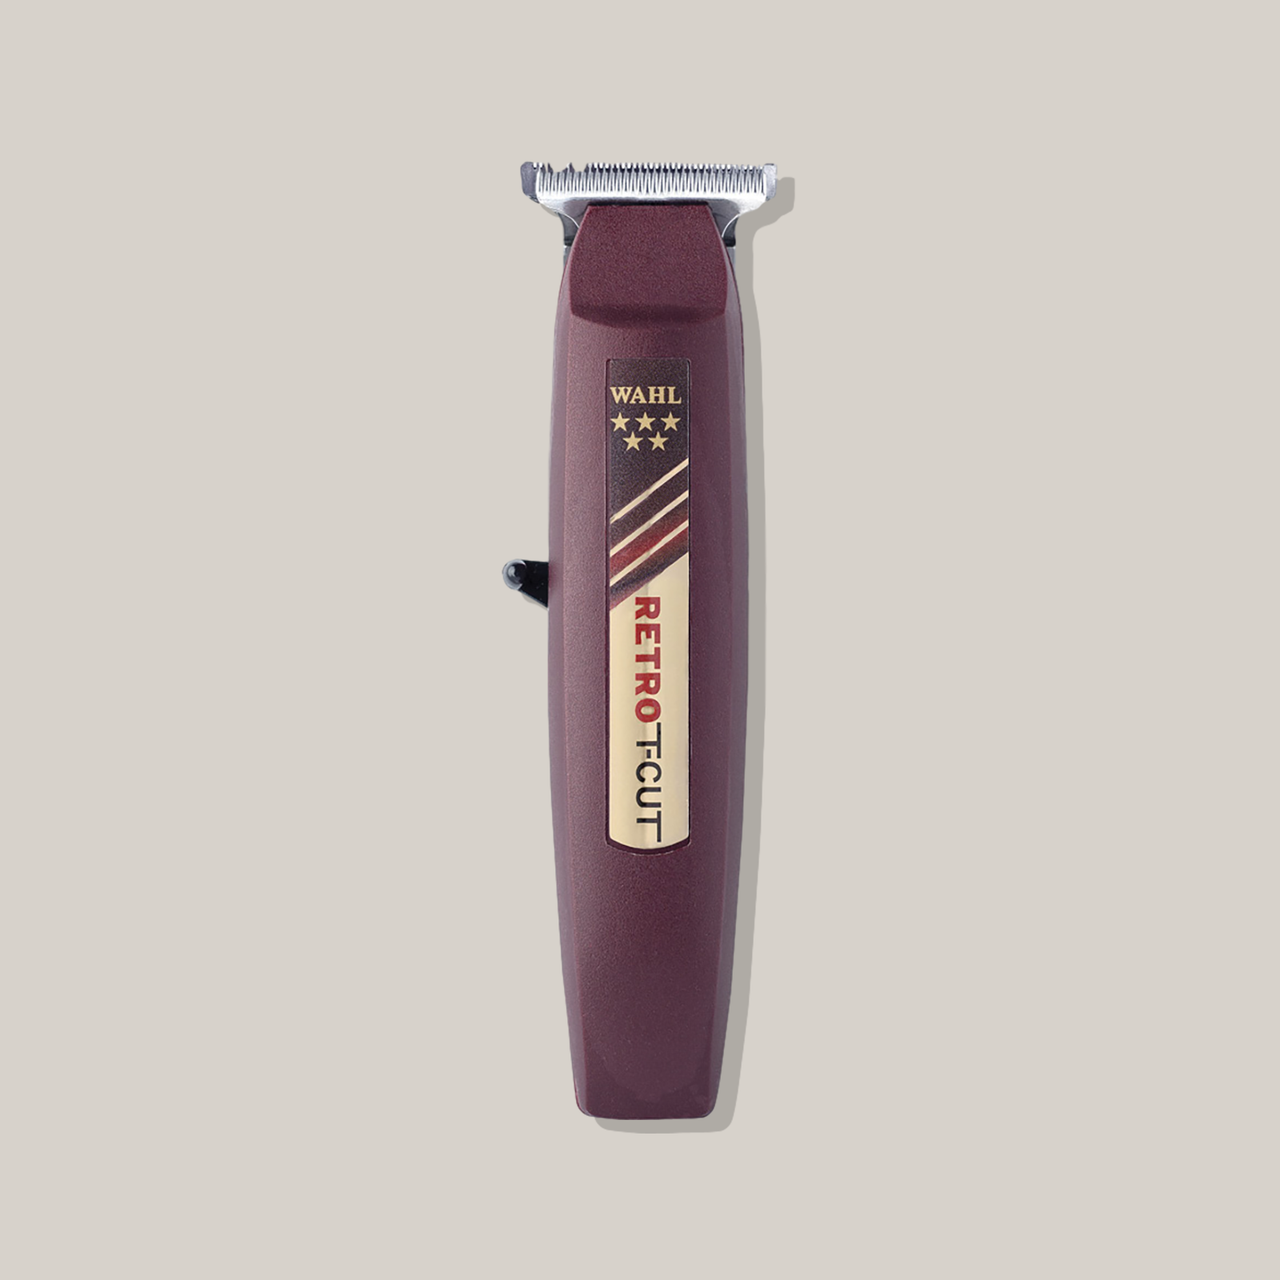 Wahl 5 Star cordless Retro TCut trimmer #56417 